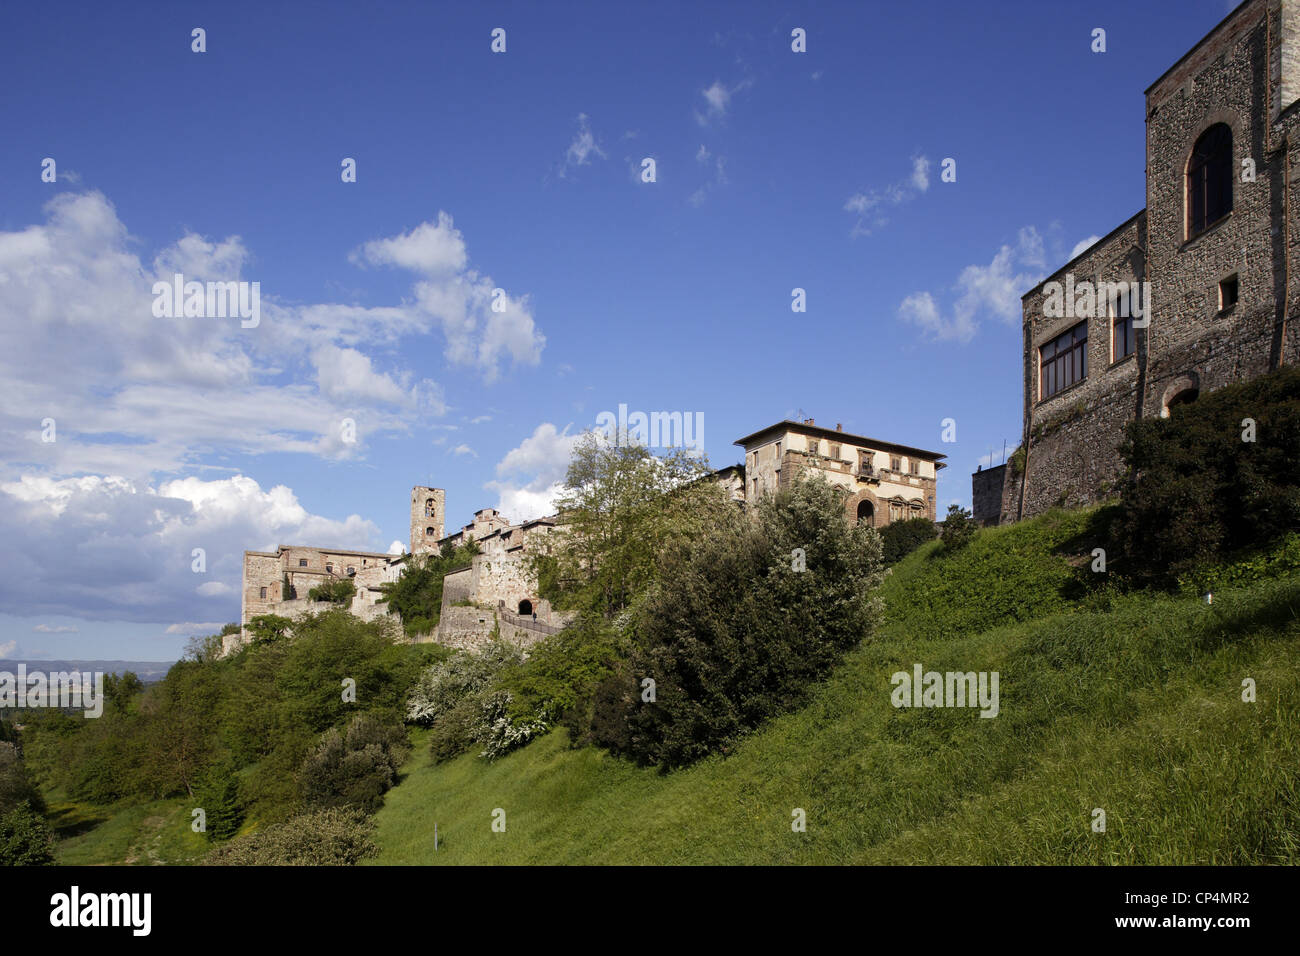 The medieval suburb with Campana Palace. Italy, Tuscany Region, Colle Val d'Elsa. Stock Photo